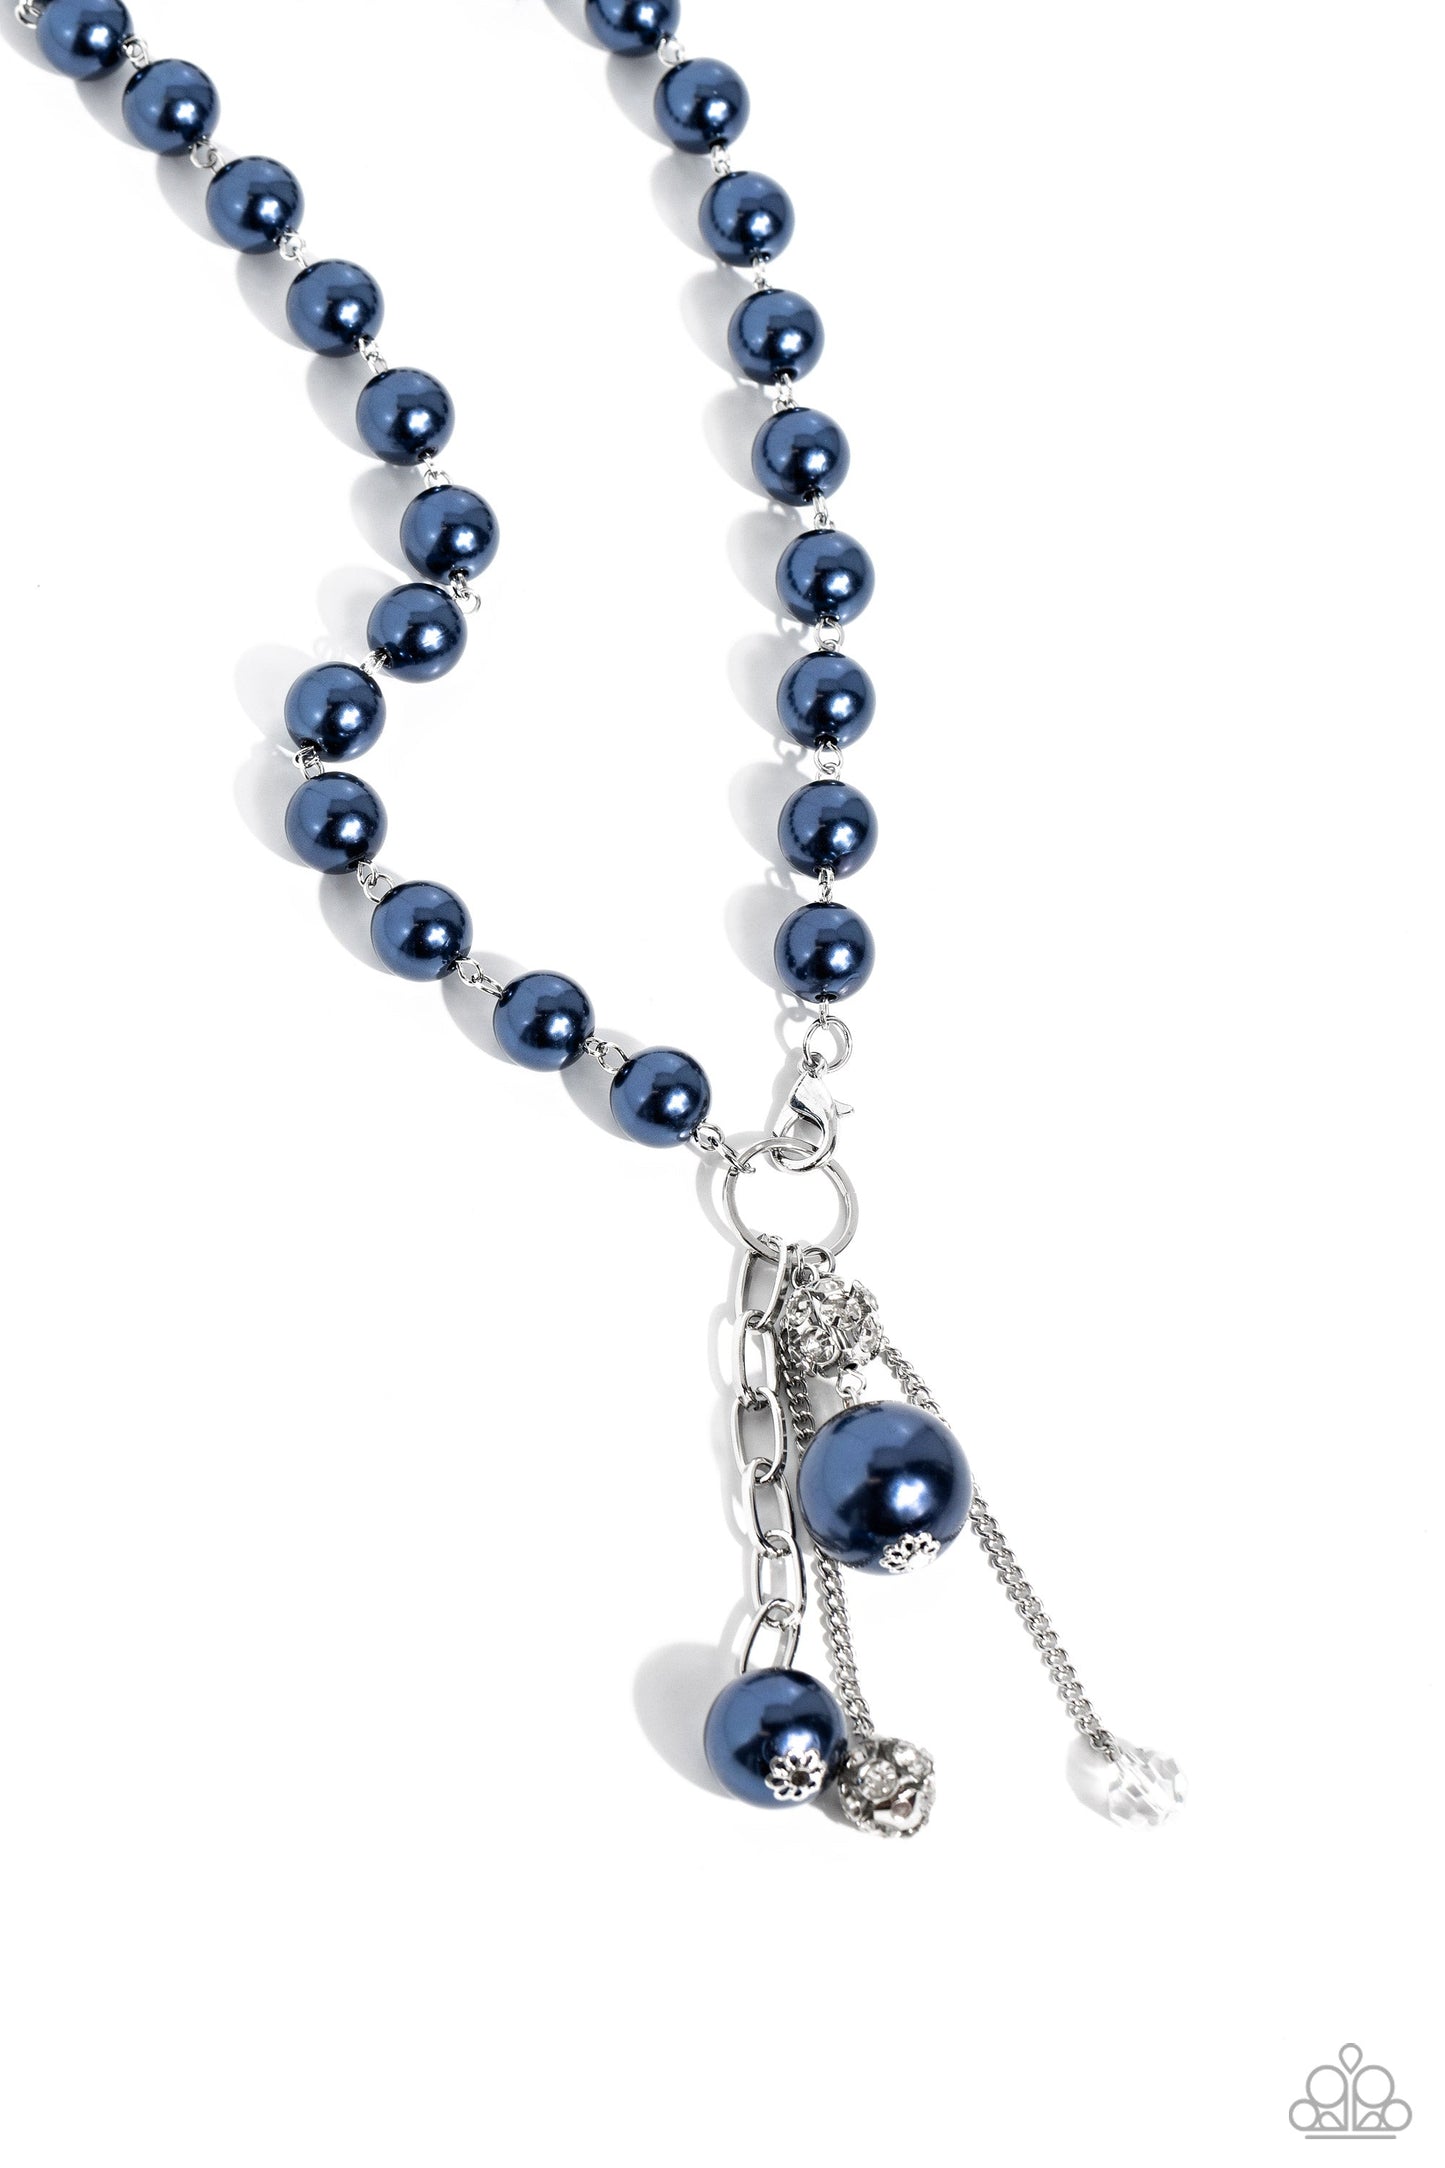 White Collar Welcome - Blue Pearl Necklace - Paparazzi Accessories - Montana pearls trickle below the collar attaching to a silver hoop as it nears the center of the chest. Accented with oversized Montana pearls, rhinestone-encrusted beads, faceted clear beads, and strands of silver chains cascade from the bottom of the silver hoop creating a charming, refined display.